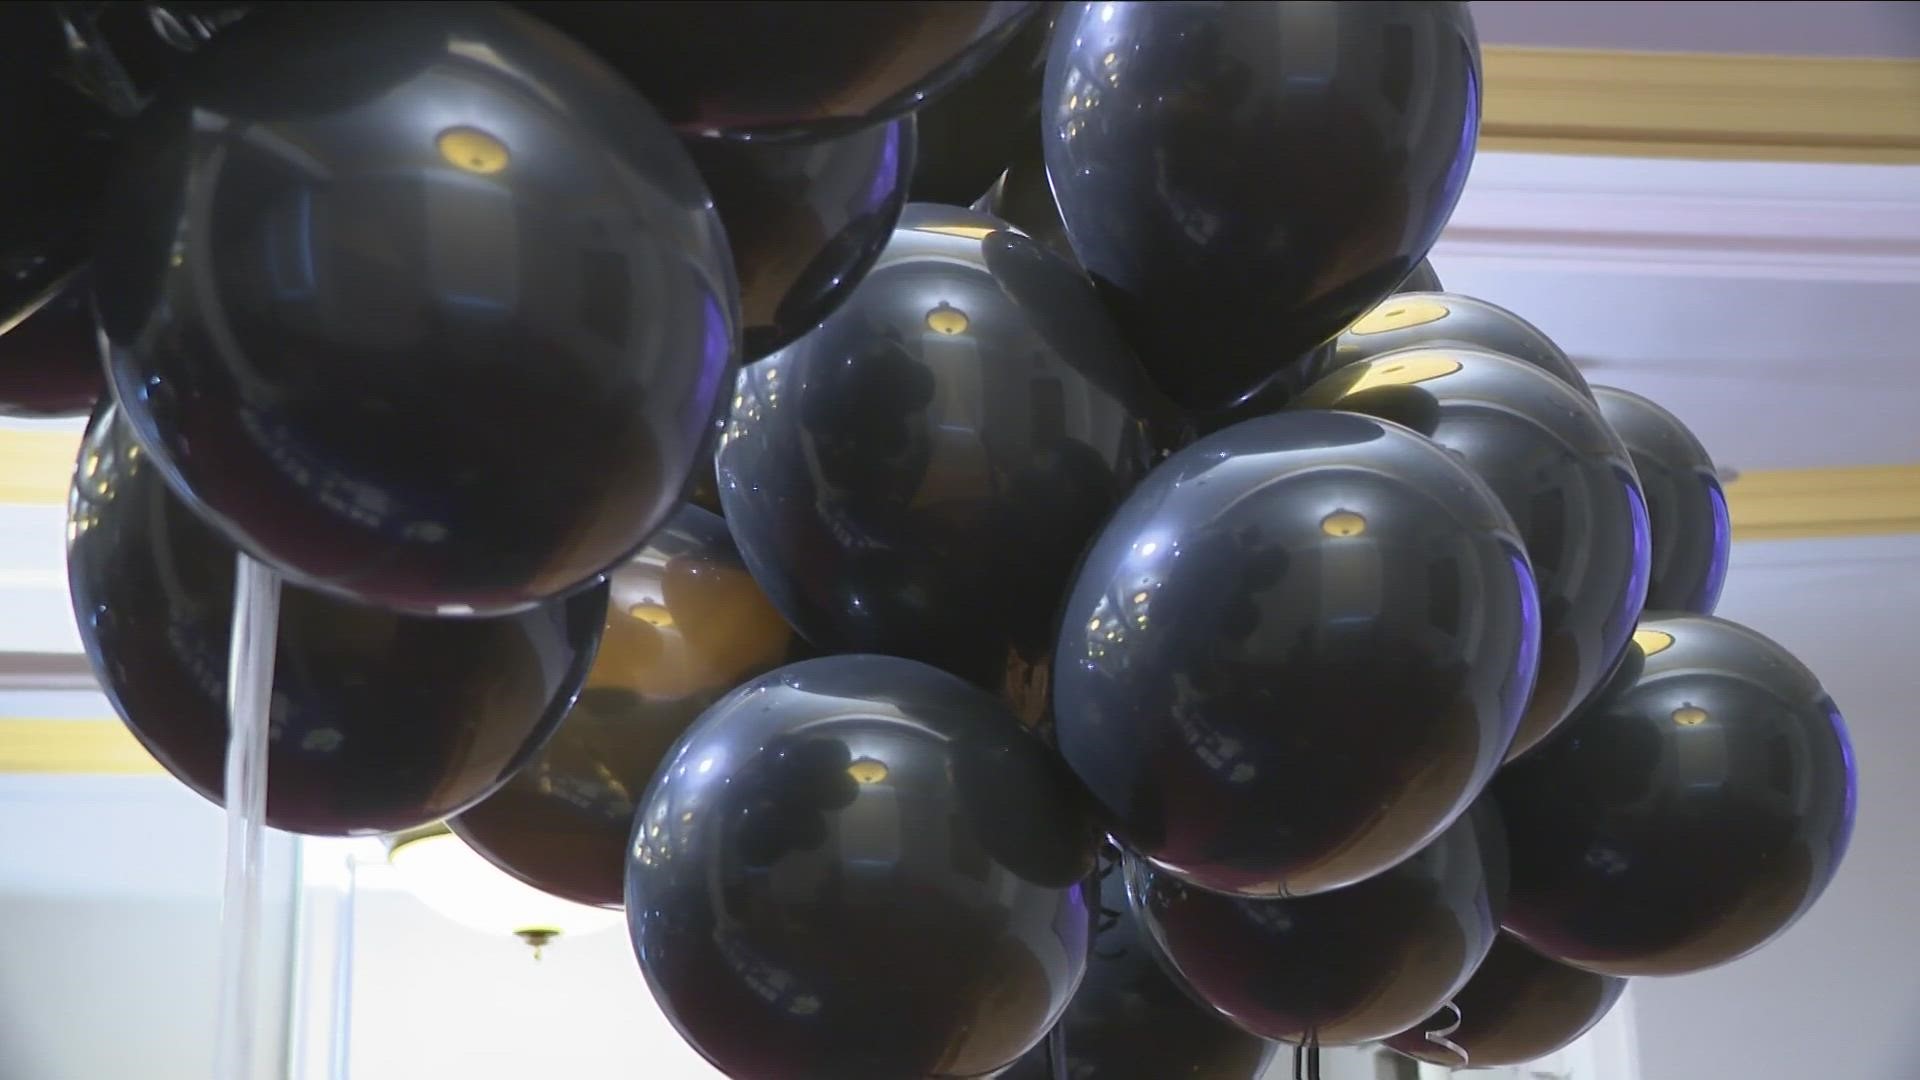 Local leaders joined family and friends to display black balloons at the Buffalo History Museum, representing their lost loved ones, by sharing photos and names.